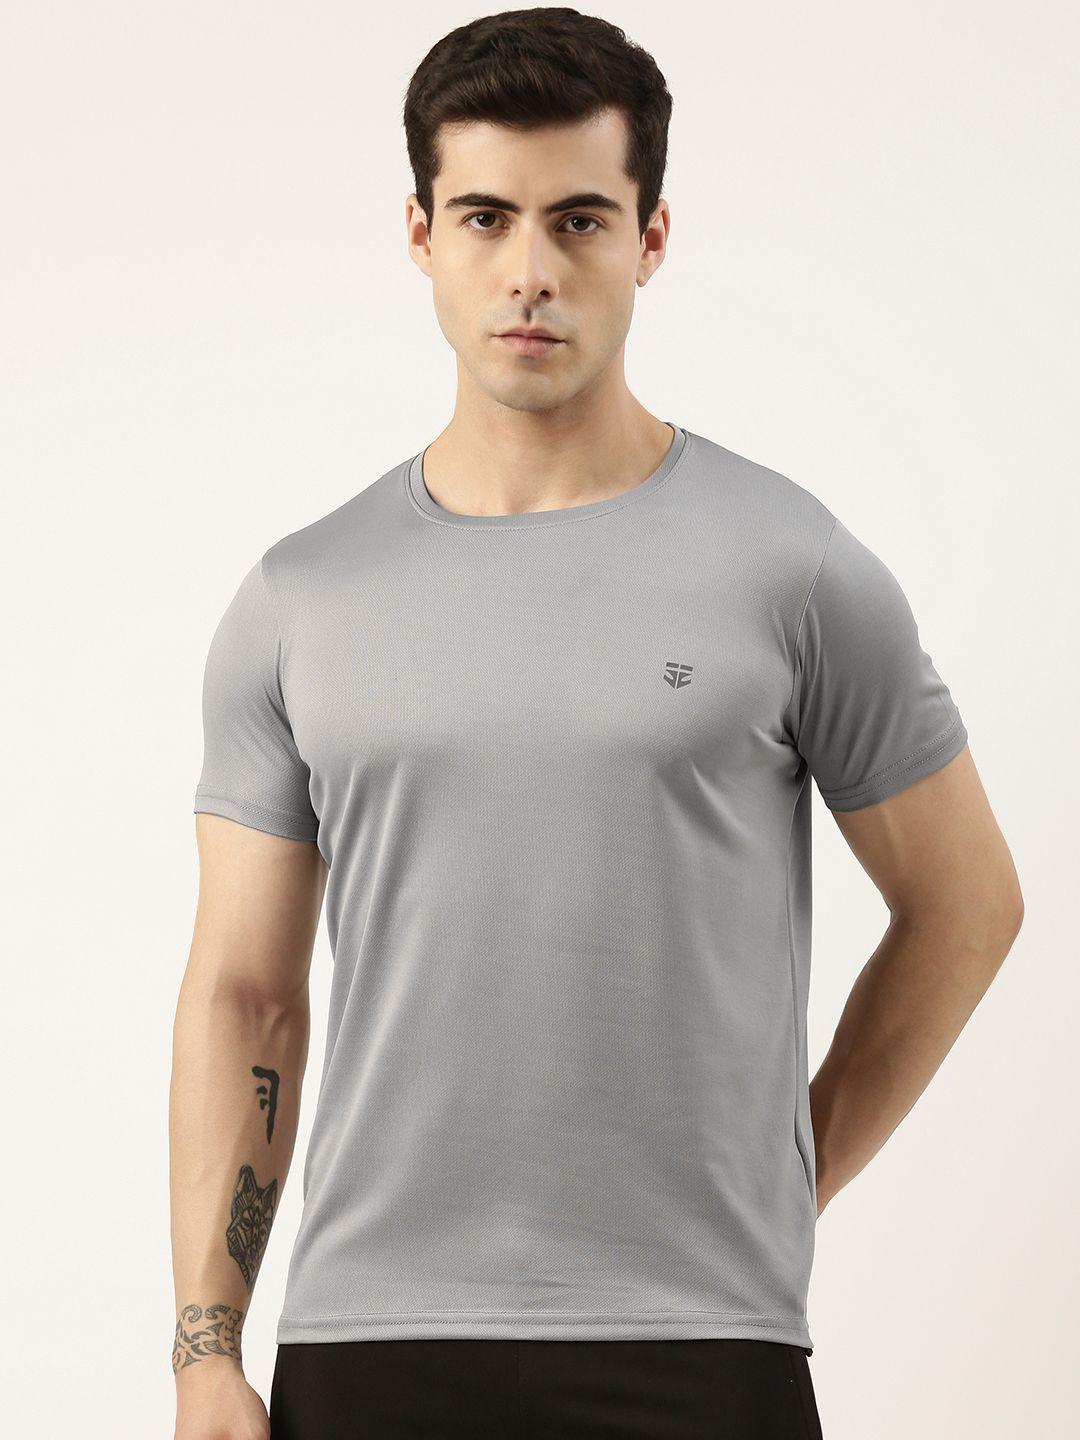 sports52 wear round neck dry fit training or gym t-shirt